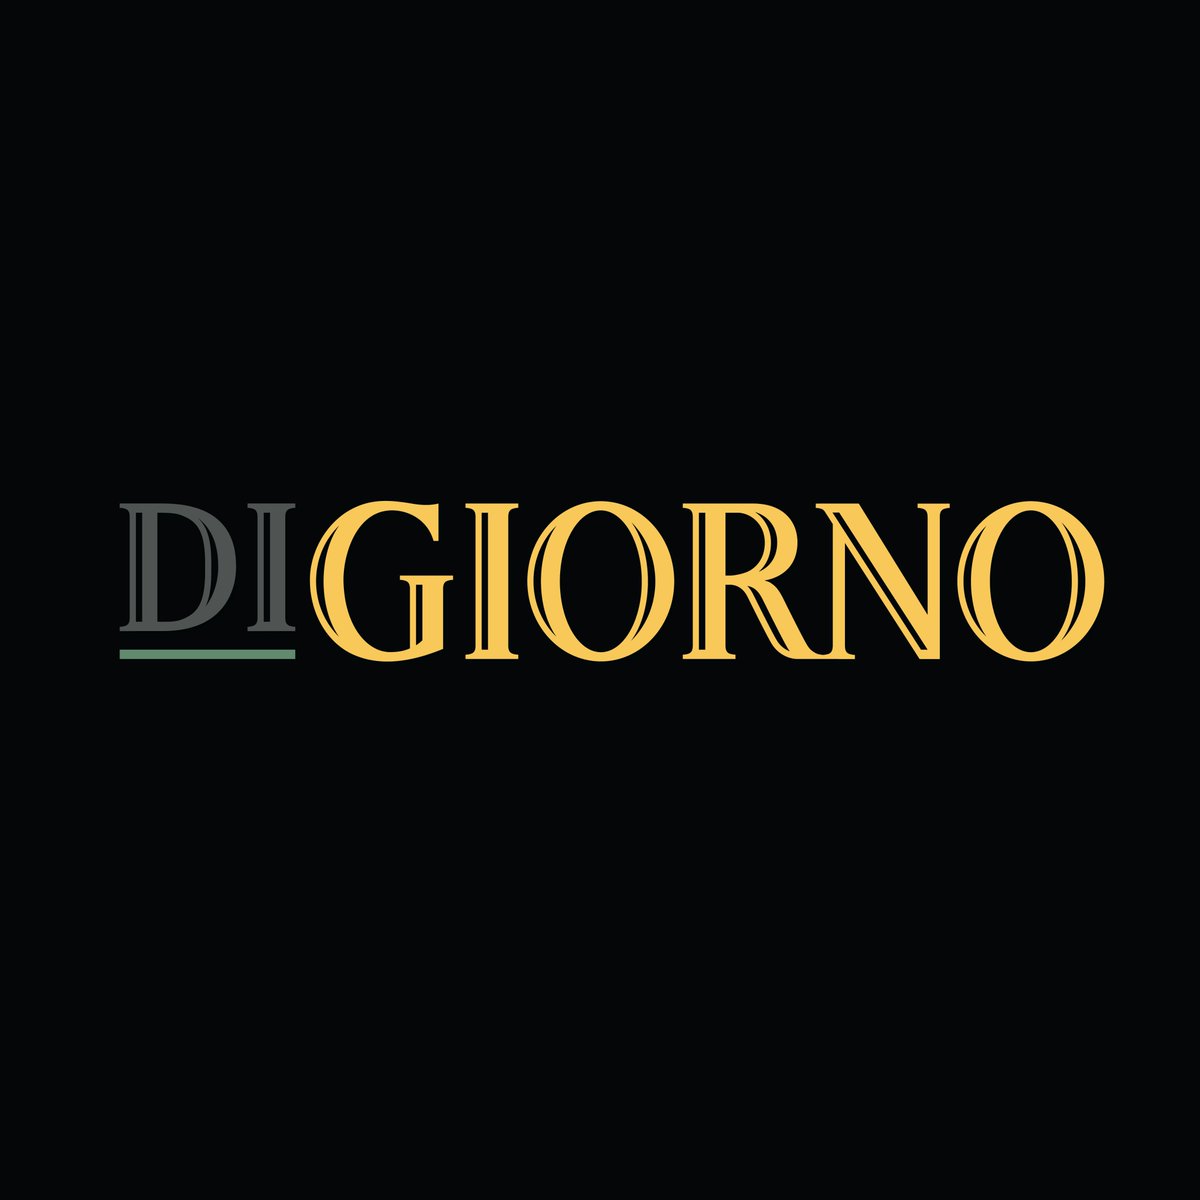 Digiorno On Twitter It S Not Gold Experience It S Gold